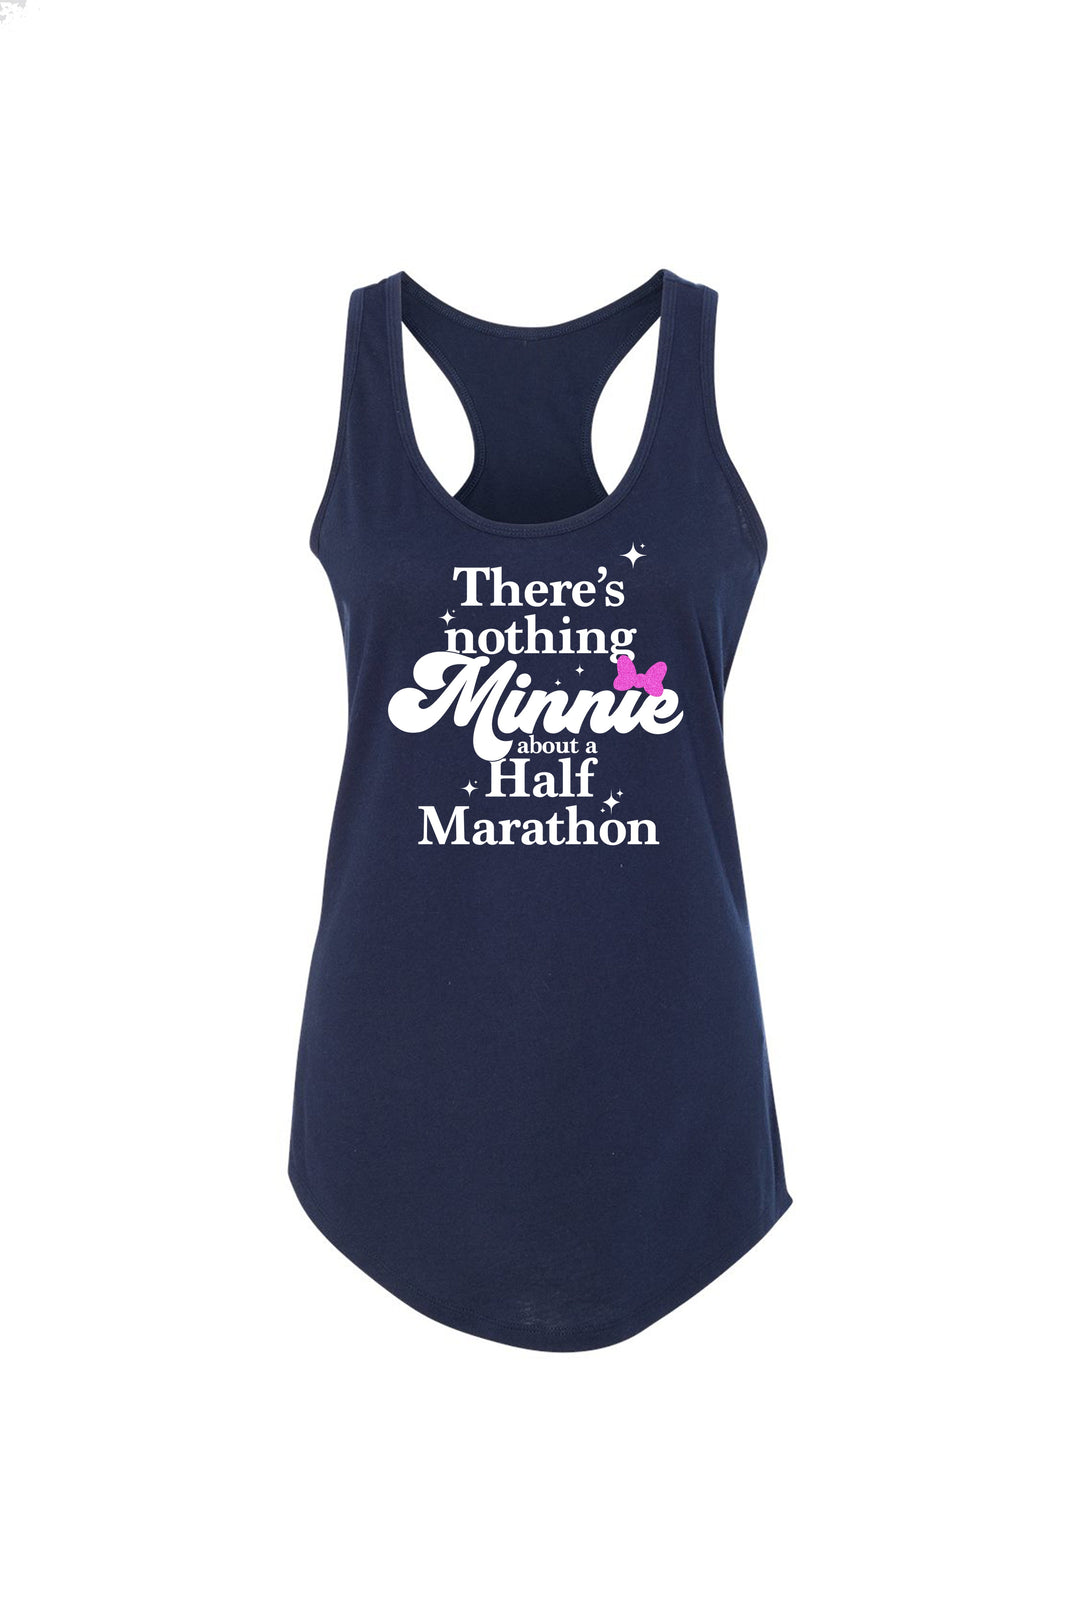 Sarah Marie Design Studio Women's Tank Navy / XSmall There's nothing Minnie about a Half RunDisney Racerback Tank